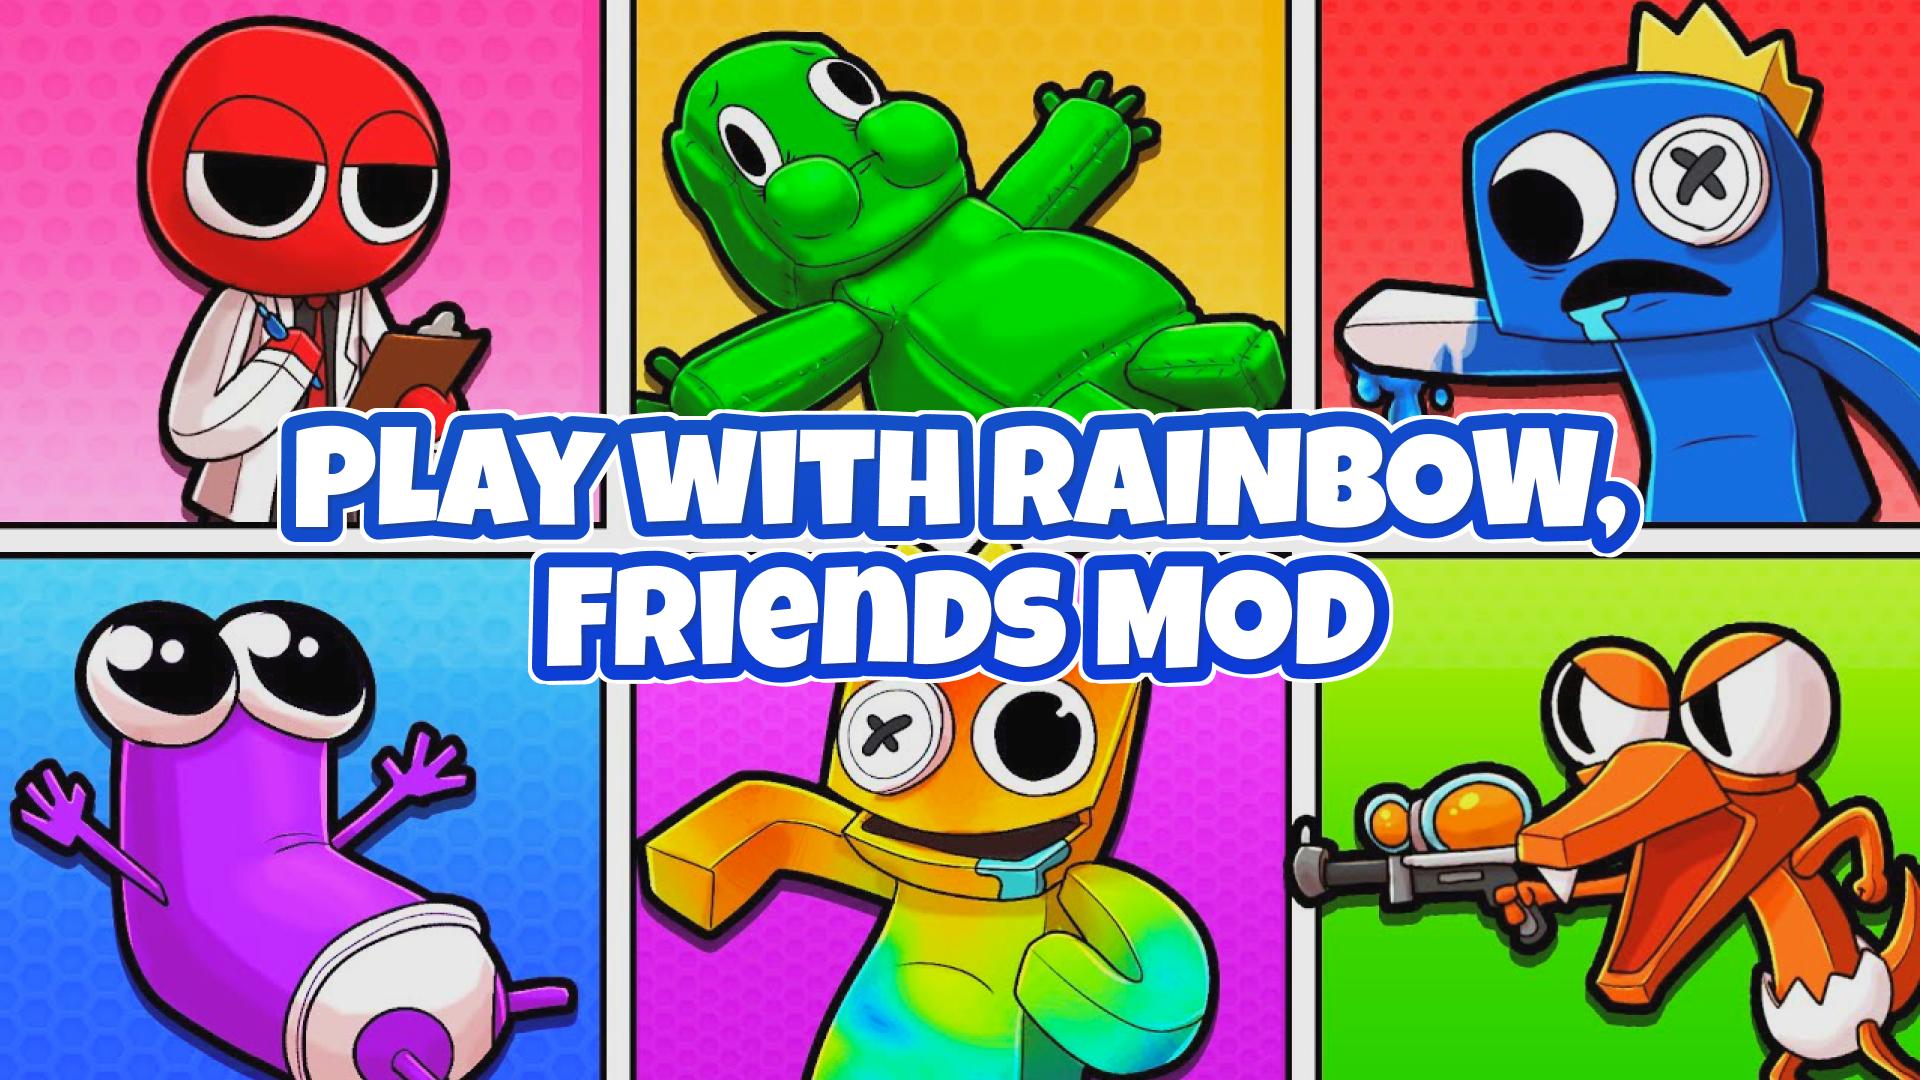 Download Rainbow Lego Friends Mod android on PC